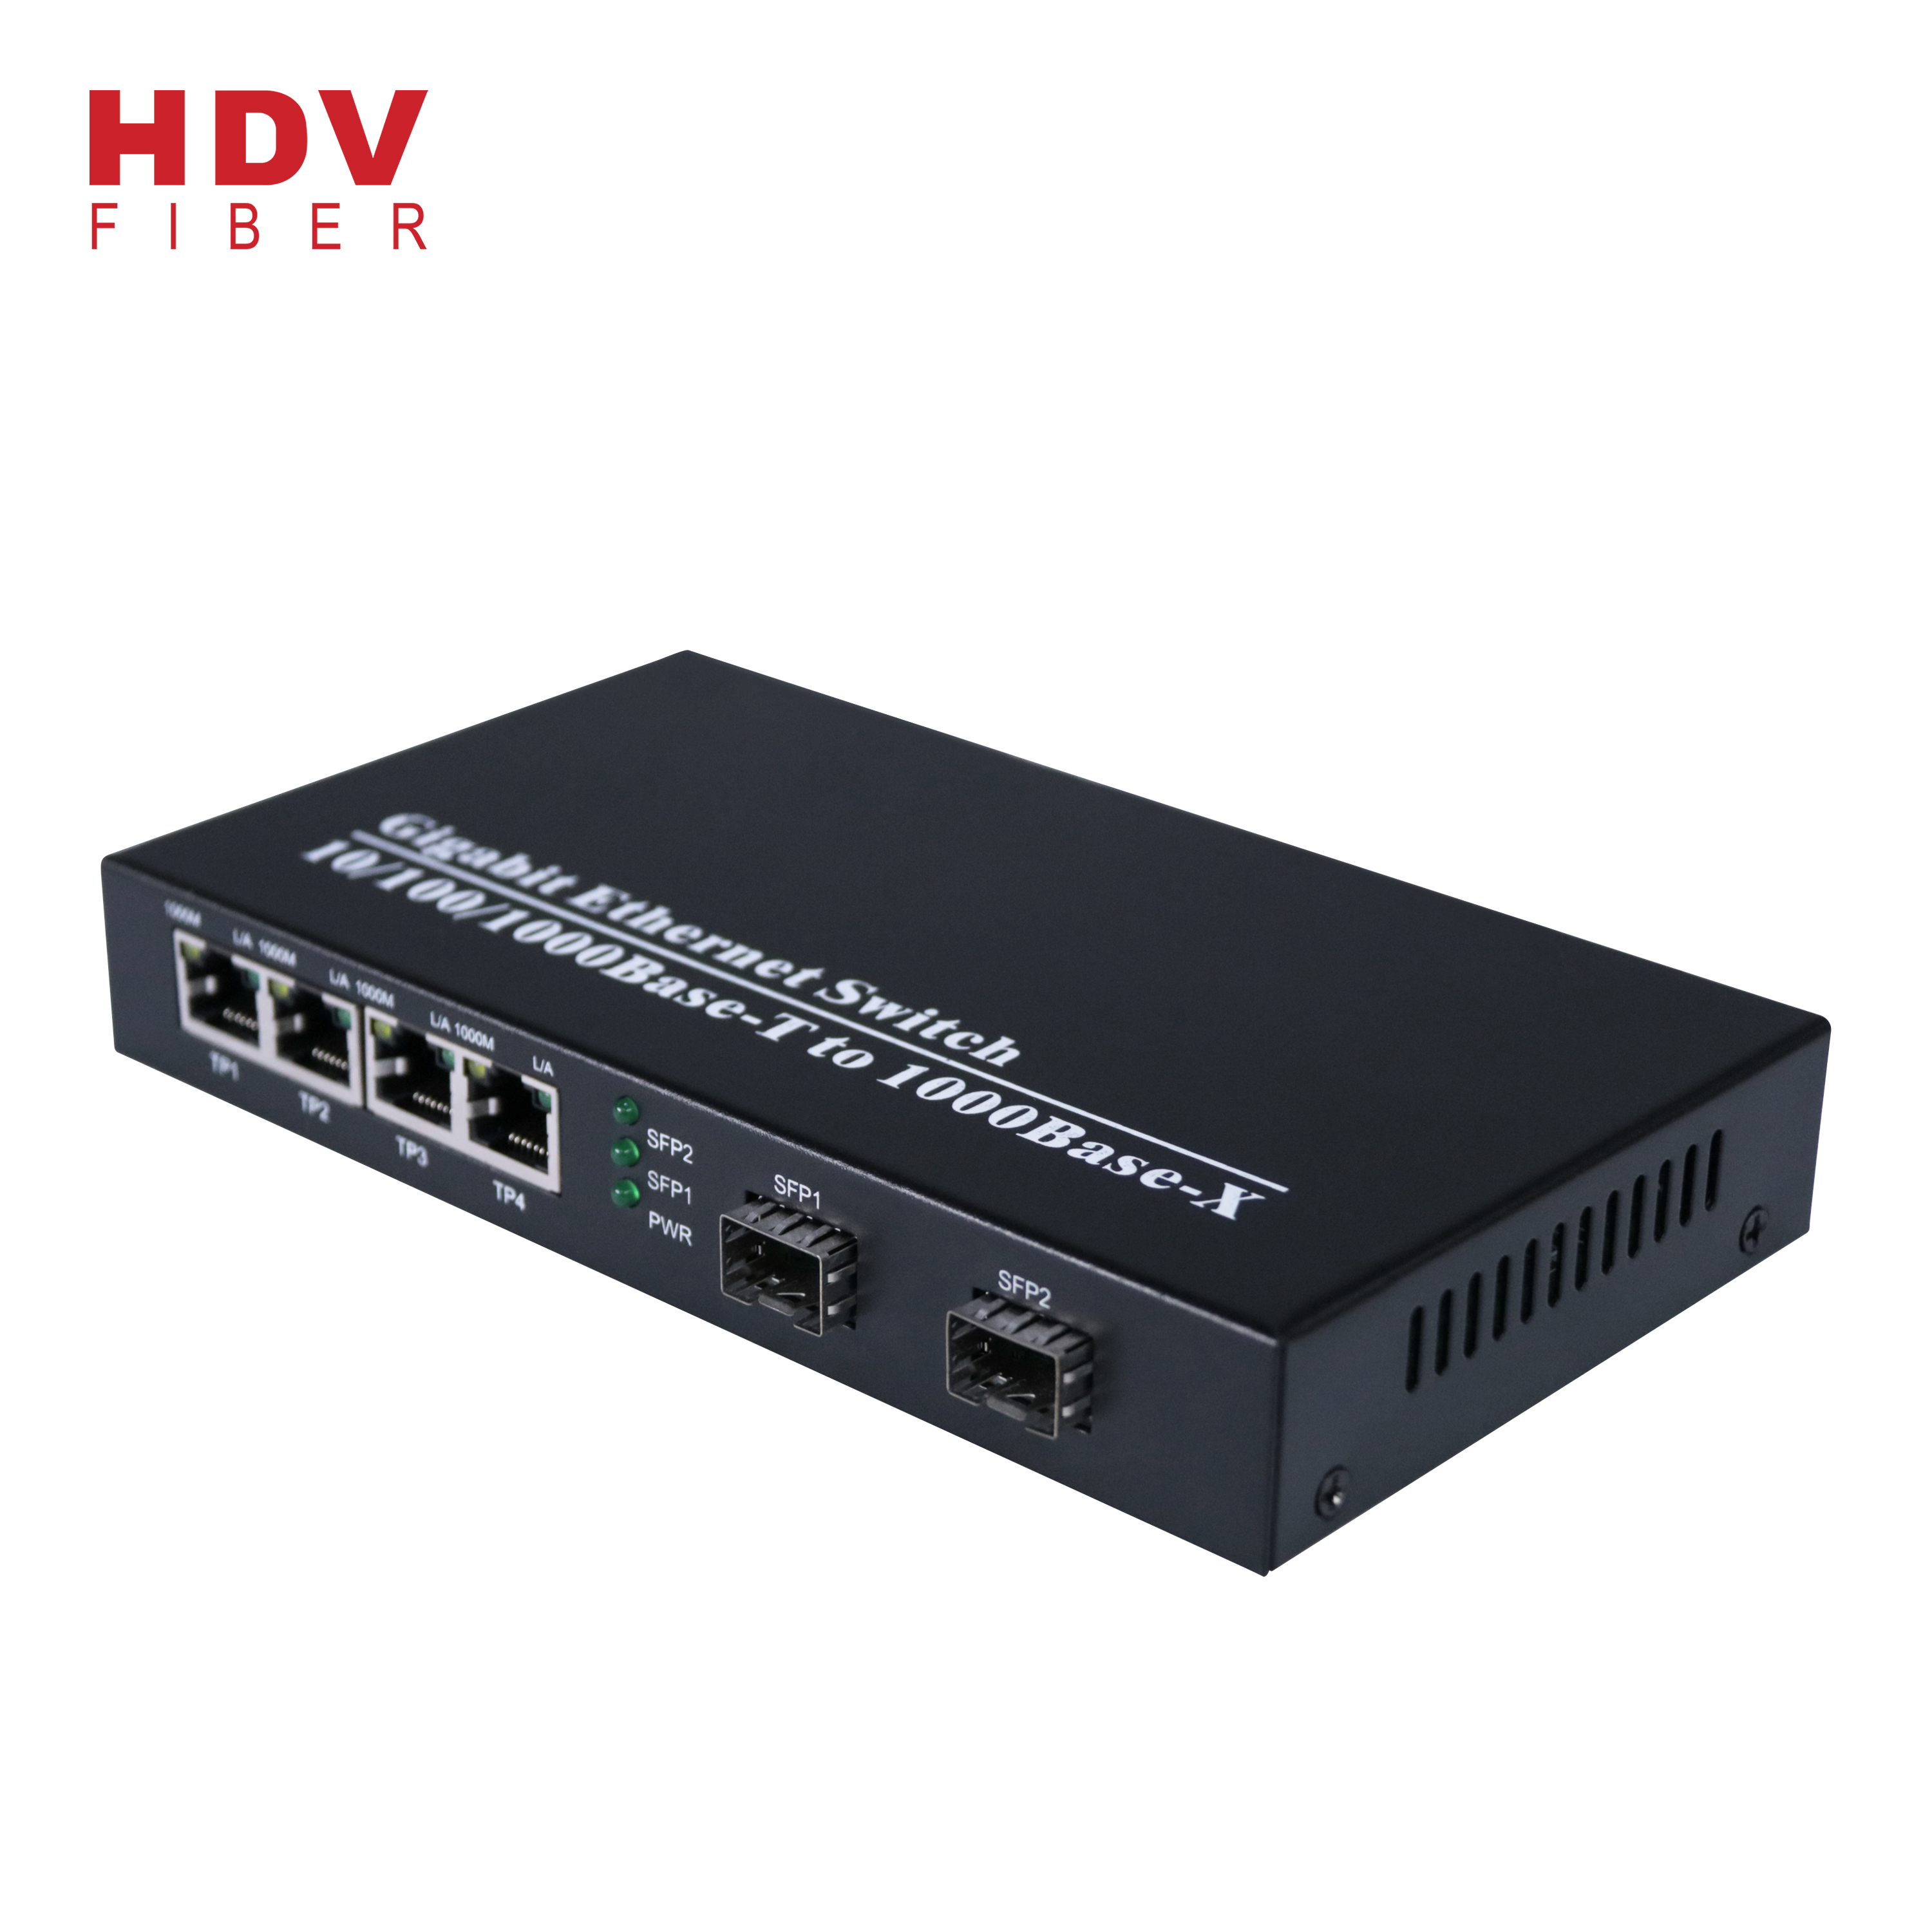 Managed Industrial Ethernet Switch - 4 Port Gigabit Ethernet Switch and 2 SFP Ports 1000M fiber optic transceiver switch – HDV